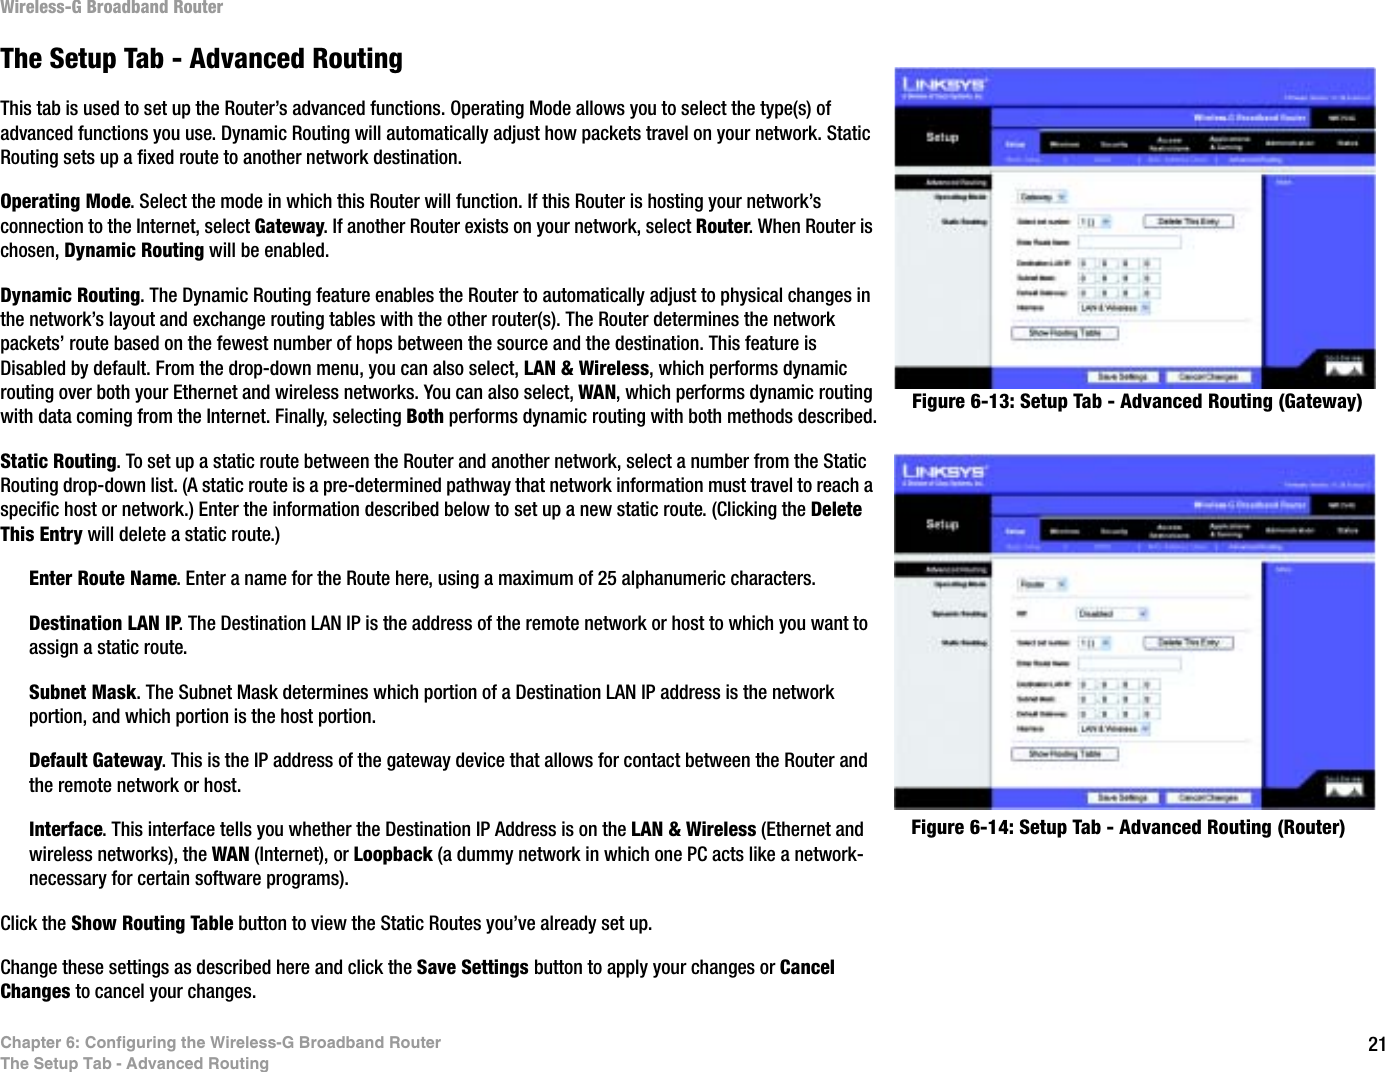 21Chapter 6: Configuring the Wireless-G Broadband RouterThe Setup Tab - Advanced RoutingWireless-G Broadband RouterThe Setup Tab - Advanced RoutingThis tab is used to set up the Router’s advanced functions. Operating Mode allows you to select the type(s) of advanced functions you use. Dynamic Routing will automatically adjust how packets travel on your network. Static Routing sets up a fixed route to another network destination.Operating Mode. Select the mode in which this Router will function. If this Router is hosting your network’s connection to the Internet, select Gateway. If another Router exists on your network, select Router. When Router is chosen, Dynamic Routing will be enabled.Dynamic Routing. The Dynamic Routing feature enables the Router to automatically adjust to physical changes in the network’s layout and exchange routing tables with the other router(s). The Router determines the network packets’ route based on the fewest number of hops between the source and the destination. This feature is Disabled by default. From the drop-down menu, you can also select, LAN &amp; Wireless, which performs dynamic routing over both your Ethernet and wireless networks. You can also select, WAN, which performs dynamic routing with data coming from the Internet. Finally, selecting Both performs dynamic routing with both methods described.Static Routing. To set up a static route between the Router and another network, select a number from the Static Routing drop-down list. (A static route is a pre-determined pathway that network information must travel to reach a specific host or network.) Enter the information described below to set up a new static route. (Clicking the DeleteThis Entry will delete a static route.)Enter Route Name. Enter a name for the Route here, using a maximum of 25 alphanumeric characters.Destination LAN IP. The Destination LAN IP is the address of the remote network or host to which you want to assign a static route.Subnet Mask. The Subnet Mask determines which portion of a Destination LAN IP address is the network portion, and which portion is the host portion. Default Gateway. This is the IP address of the gateway device that allows for contact between the Router and the remote network or host.Interface. This interface tells you whether the Destination IP Address is on the LAN &amp; Wireless (Ethernet and wireless networks), the WAN (Internet), or Loopback (a dummy network in which one PC acts like a network-necessary for certain software programs). Click the Show Routing Table button to view the Static Routes you’ve already set up.Change these settings as described here and click the Save Settings button to apply your changes or Cancel Changes to cancel your changes.Figure 6-13: Setup Tab - Advanced Routing (Gateway)Figure 6-14: Setup Tab - Advanced Routing (Router)